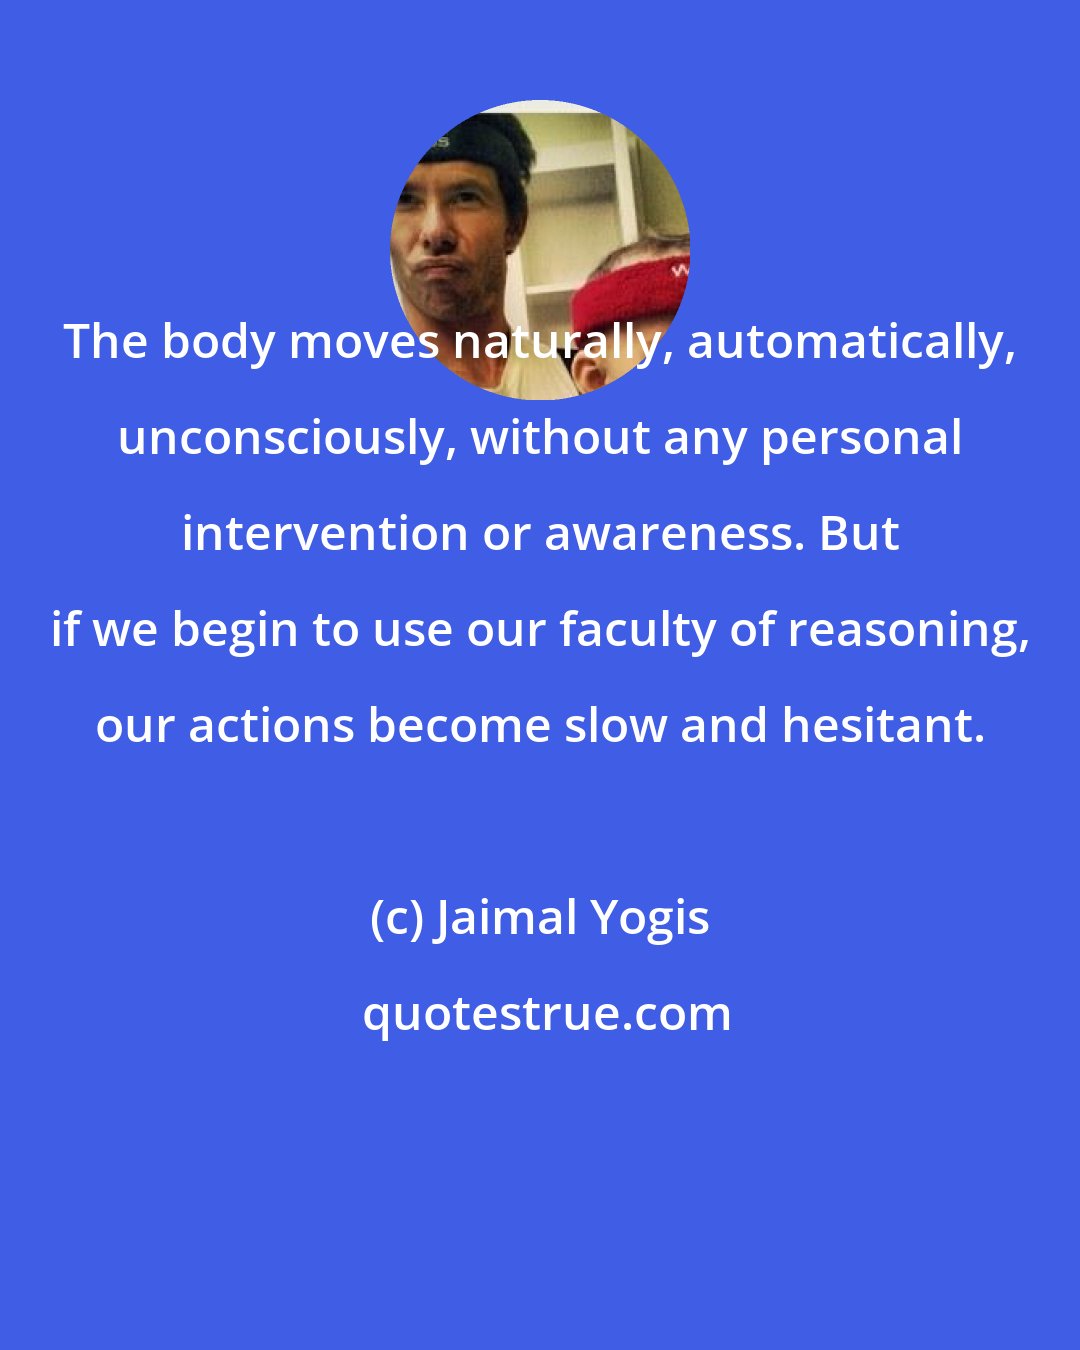 Jaimal Yogis: The body moves naturally, automatically, unconsciously, without any personal intervention or awareness. But if we begin to use our faculty of reasoning, our actions become slow and hesitant.